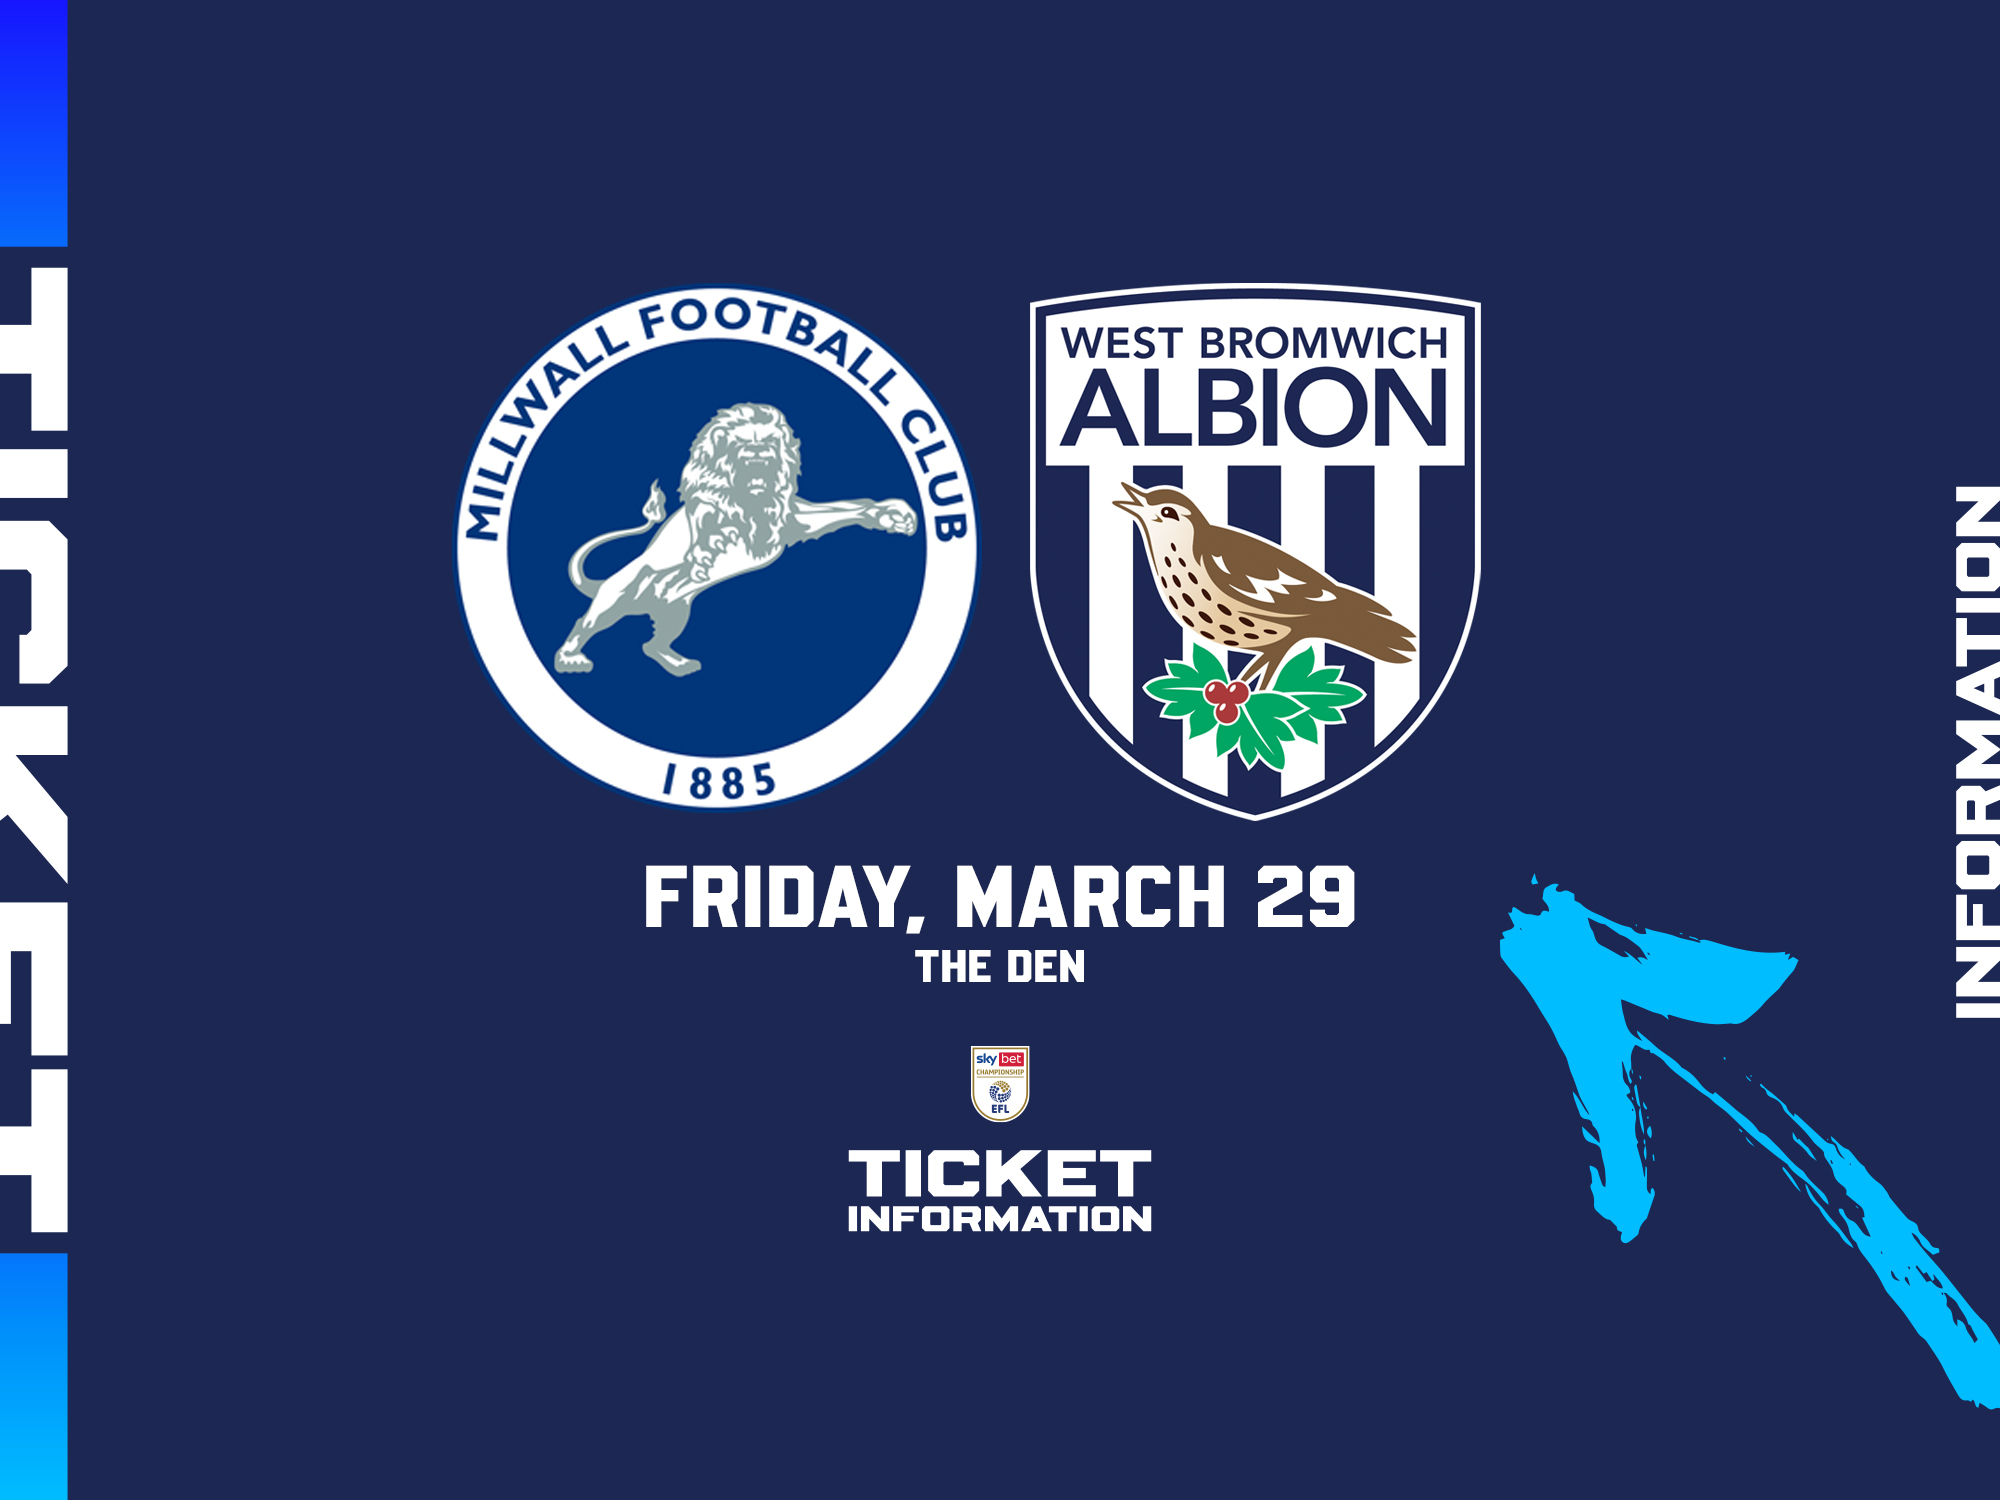 A ticket graphic displaying information for Albion's game against Millwall